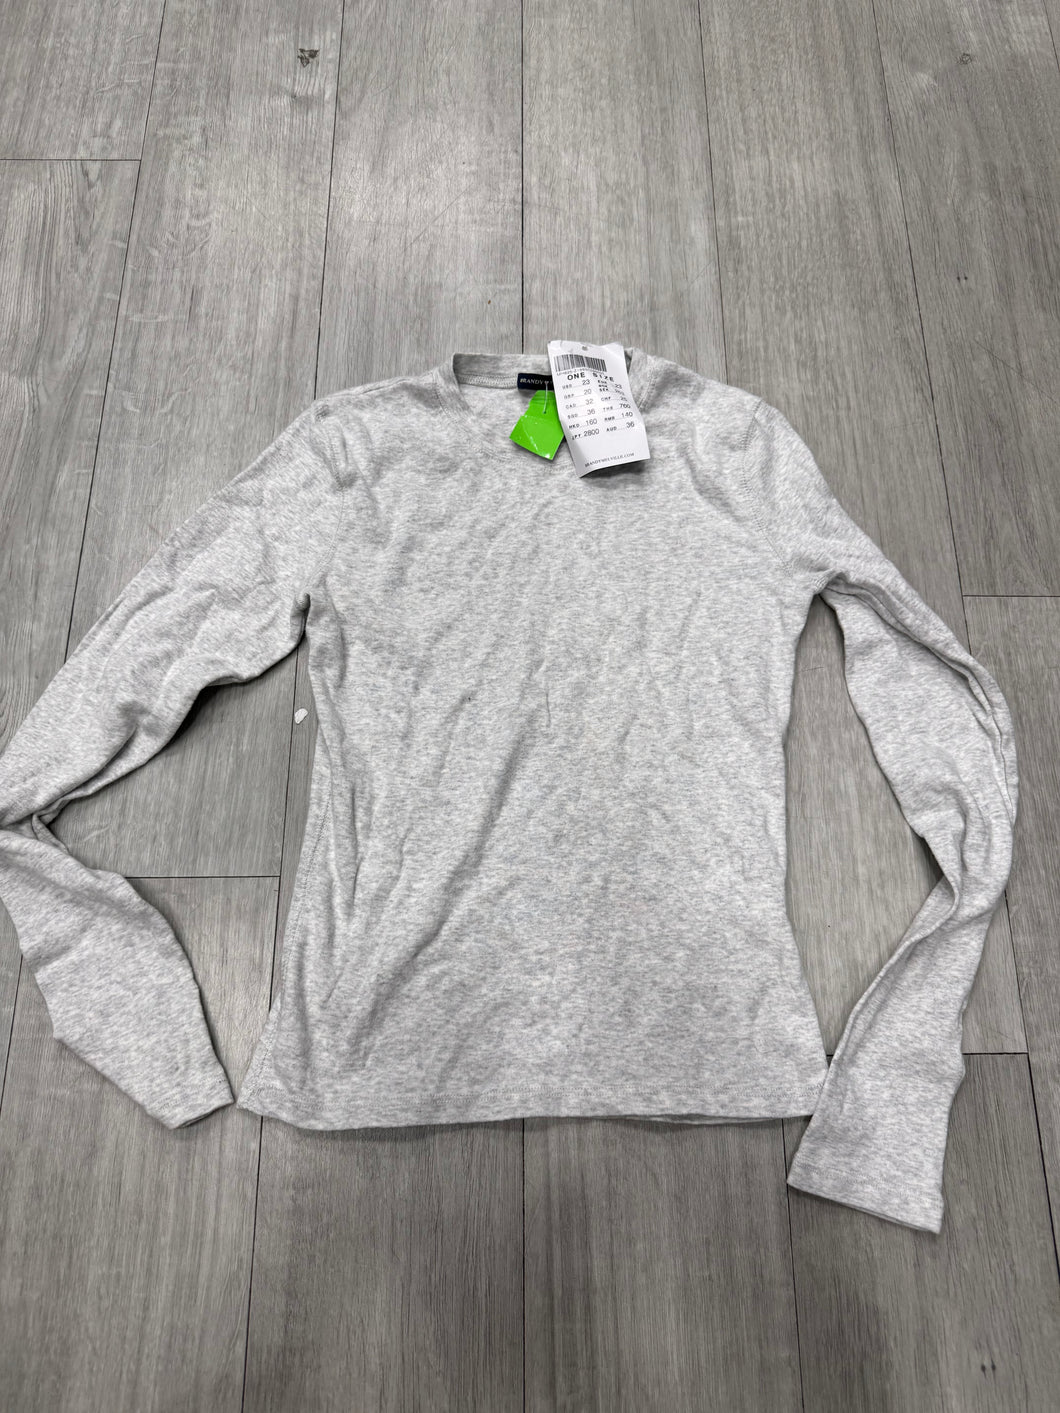 Brandy Melville Long Sleeve T-Shirt Size Extra Small nwt 6799